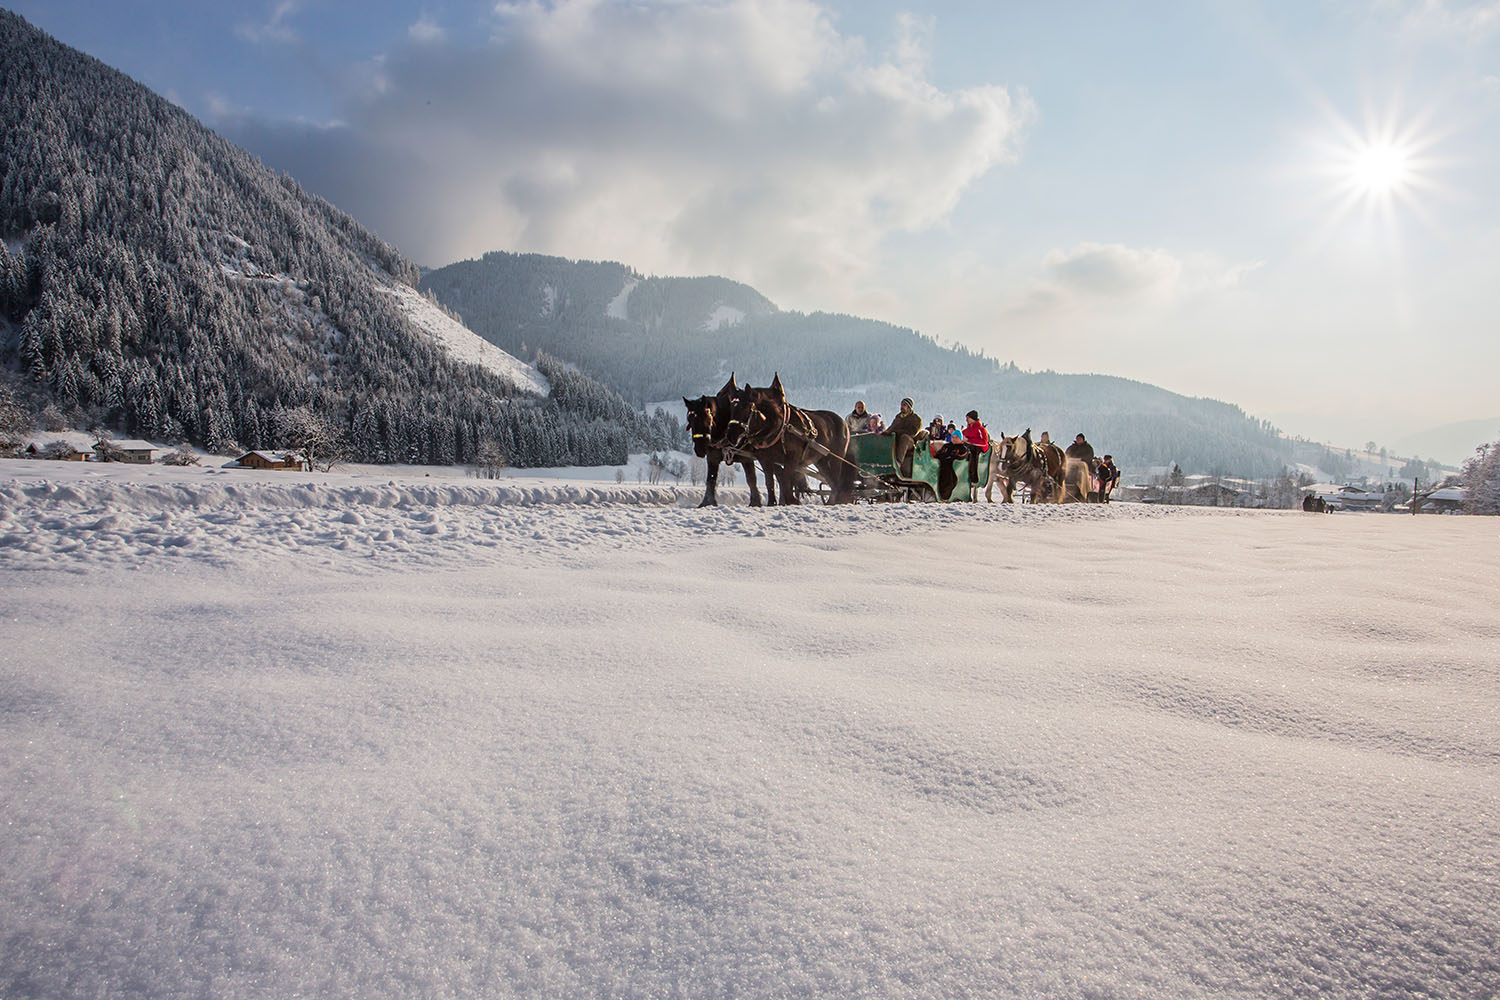 Winter mood in Salzburger Land during a sleigh ride